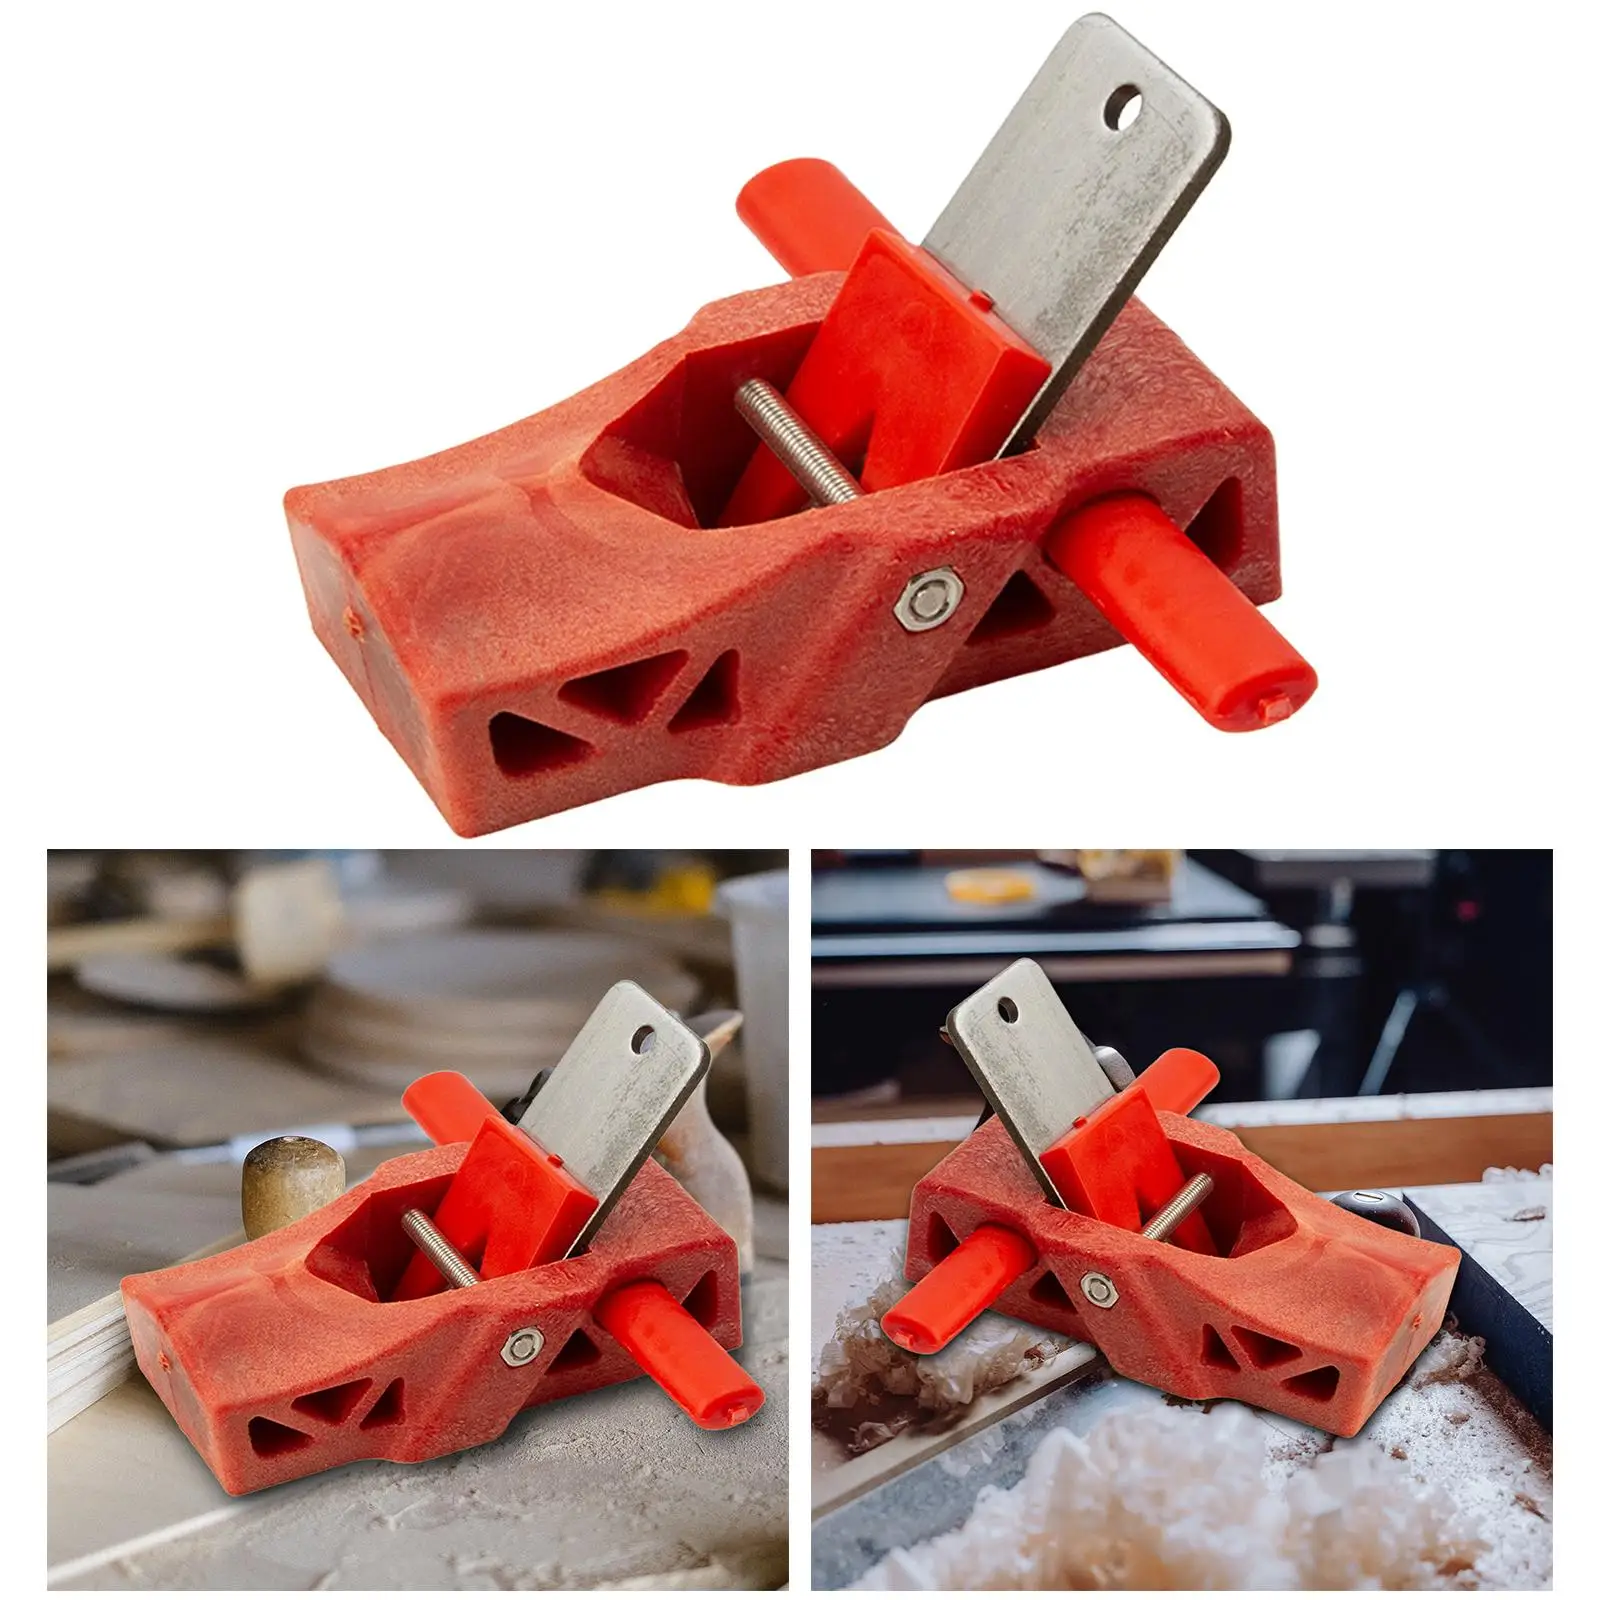 Woodworking Manual Planer Chamfer Plane Hand Hand Tools Perfect Plane Blade for Edge Rounding Corner Rounding Trimming Projects